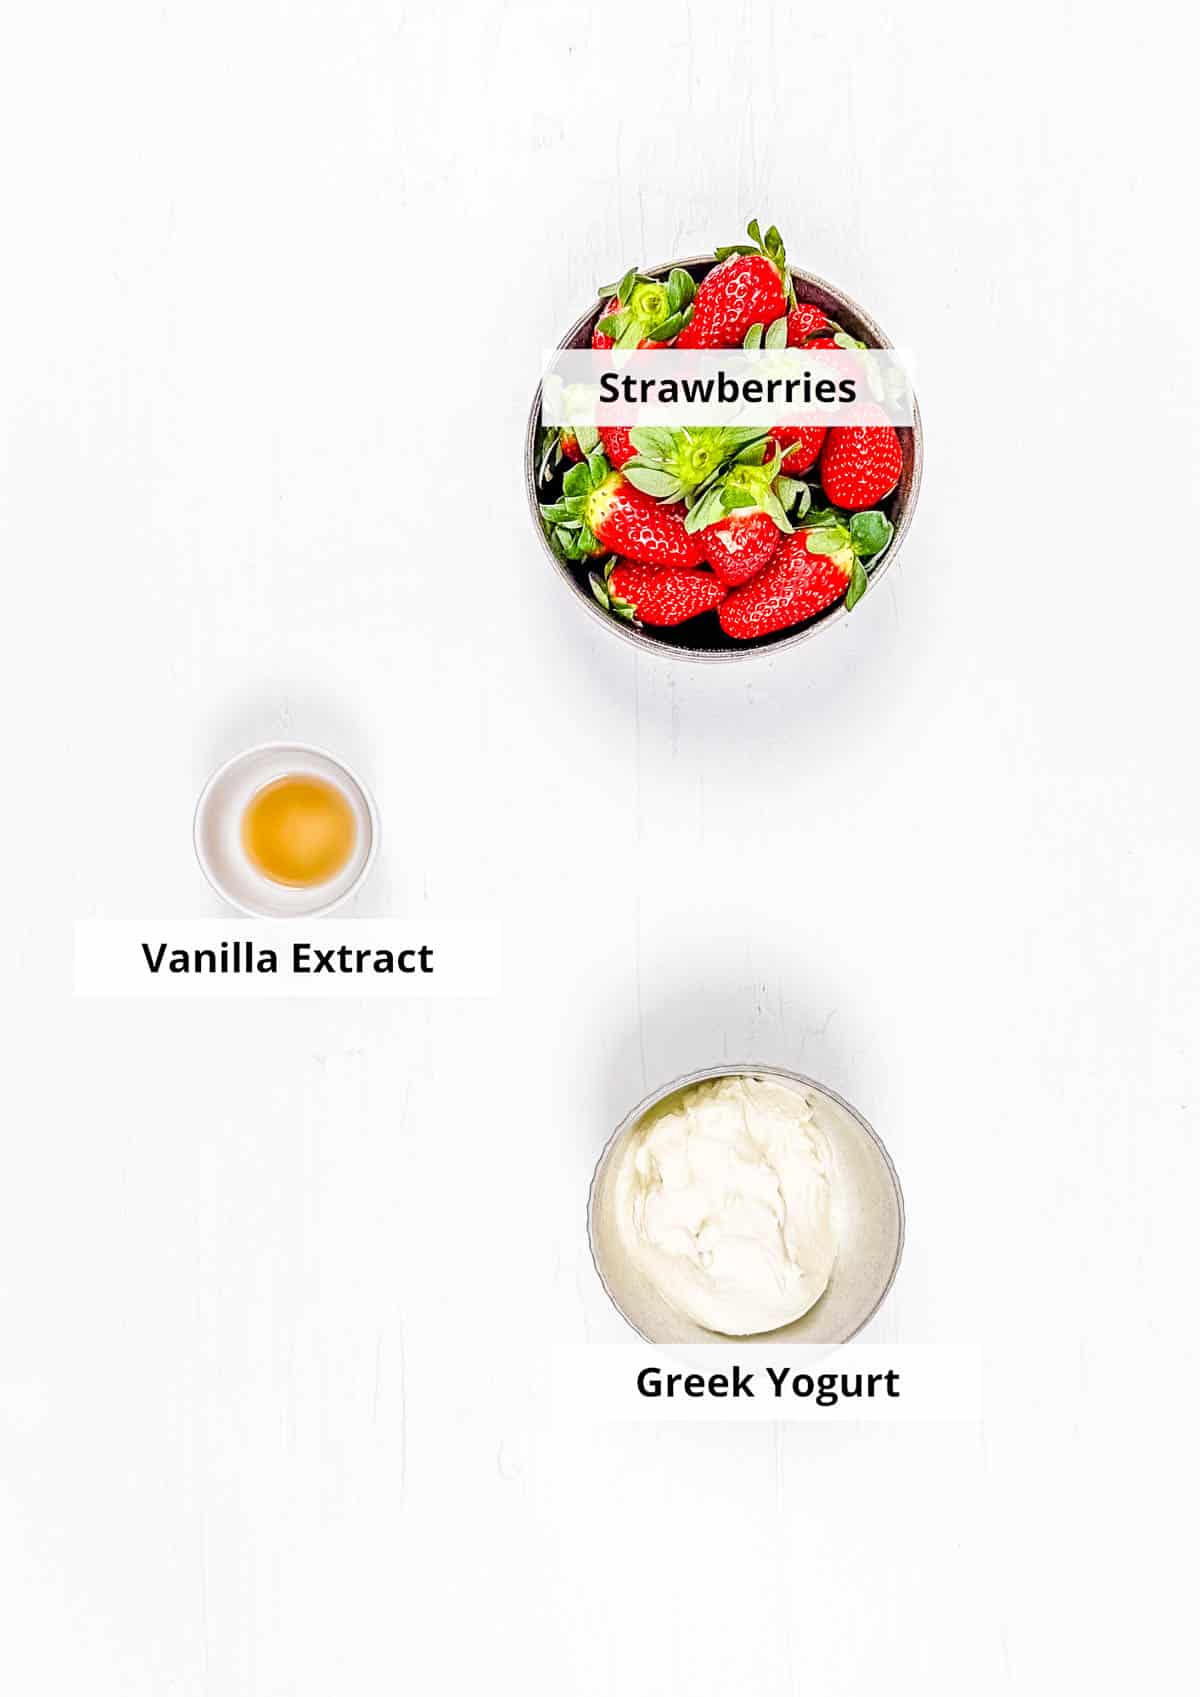 Ingredients for homemade strawberry yogurt recipe on a white background.